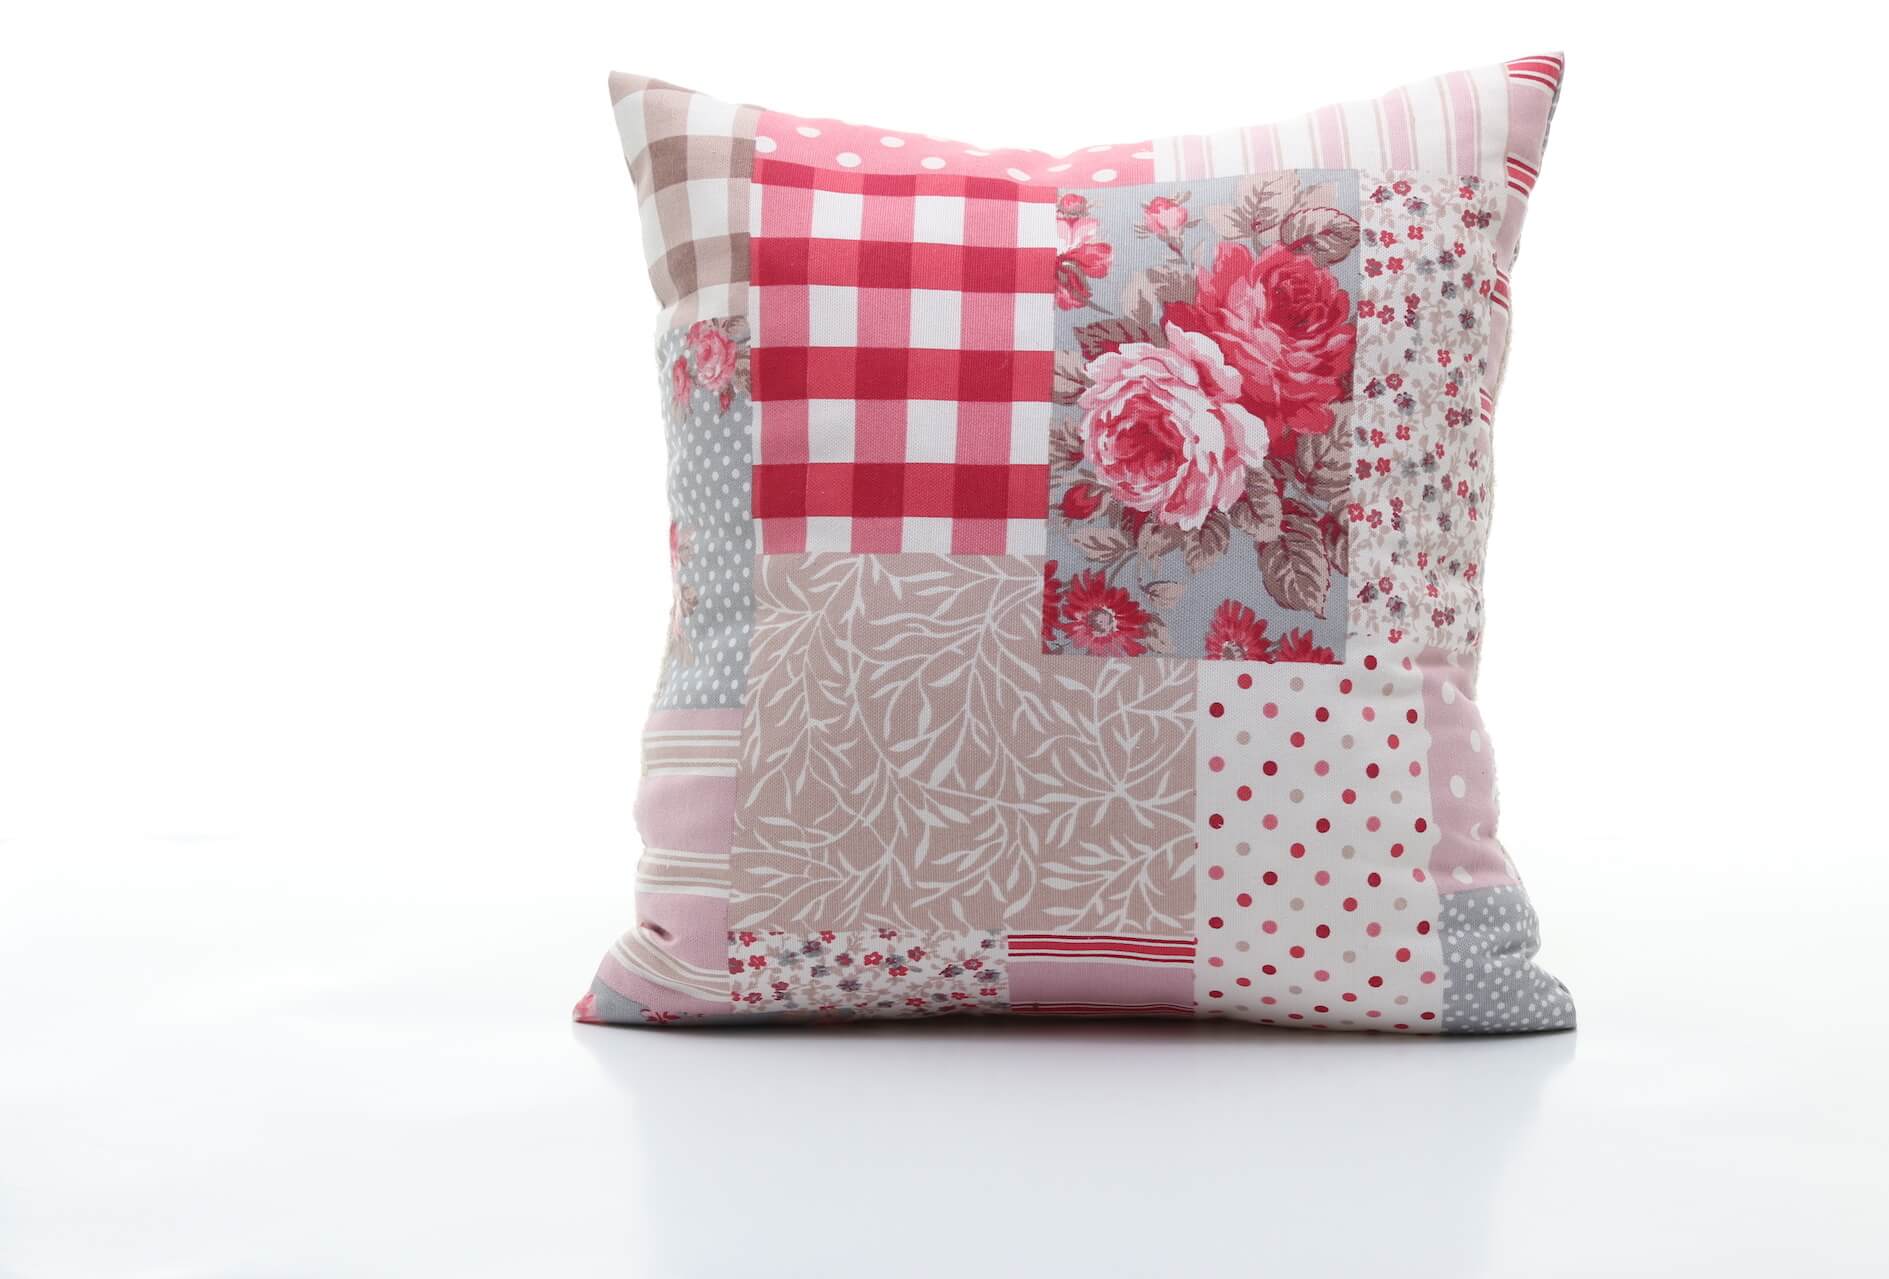 Handmade decorative pillow with floral print